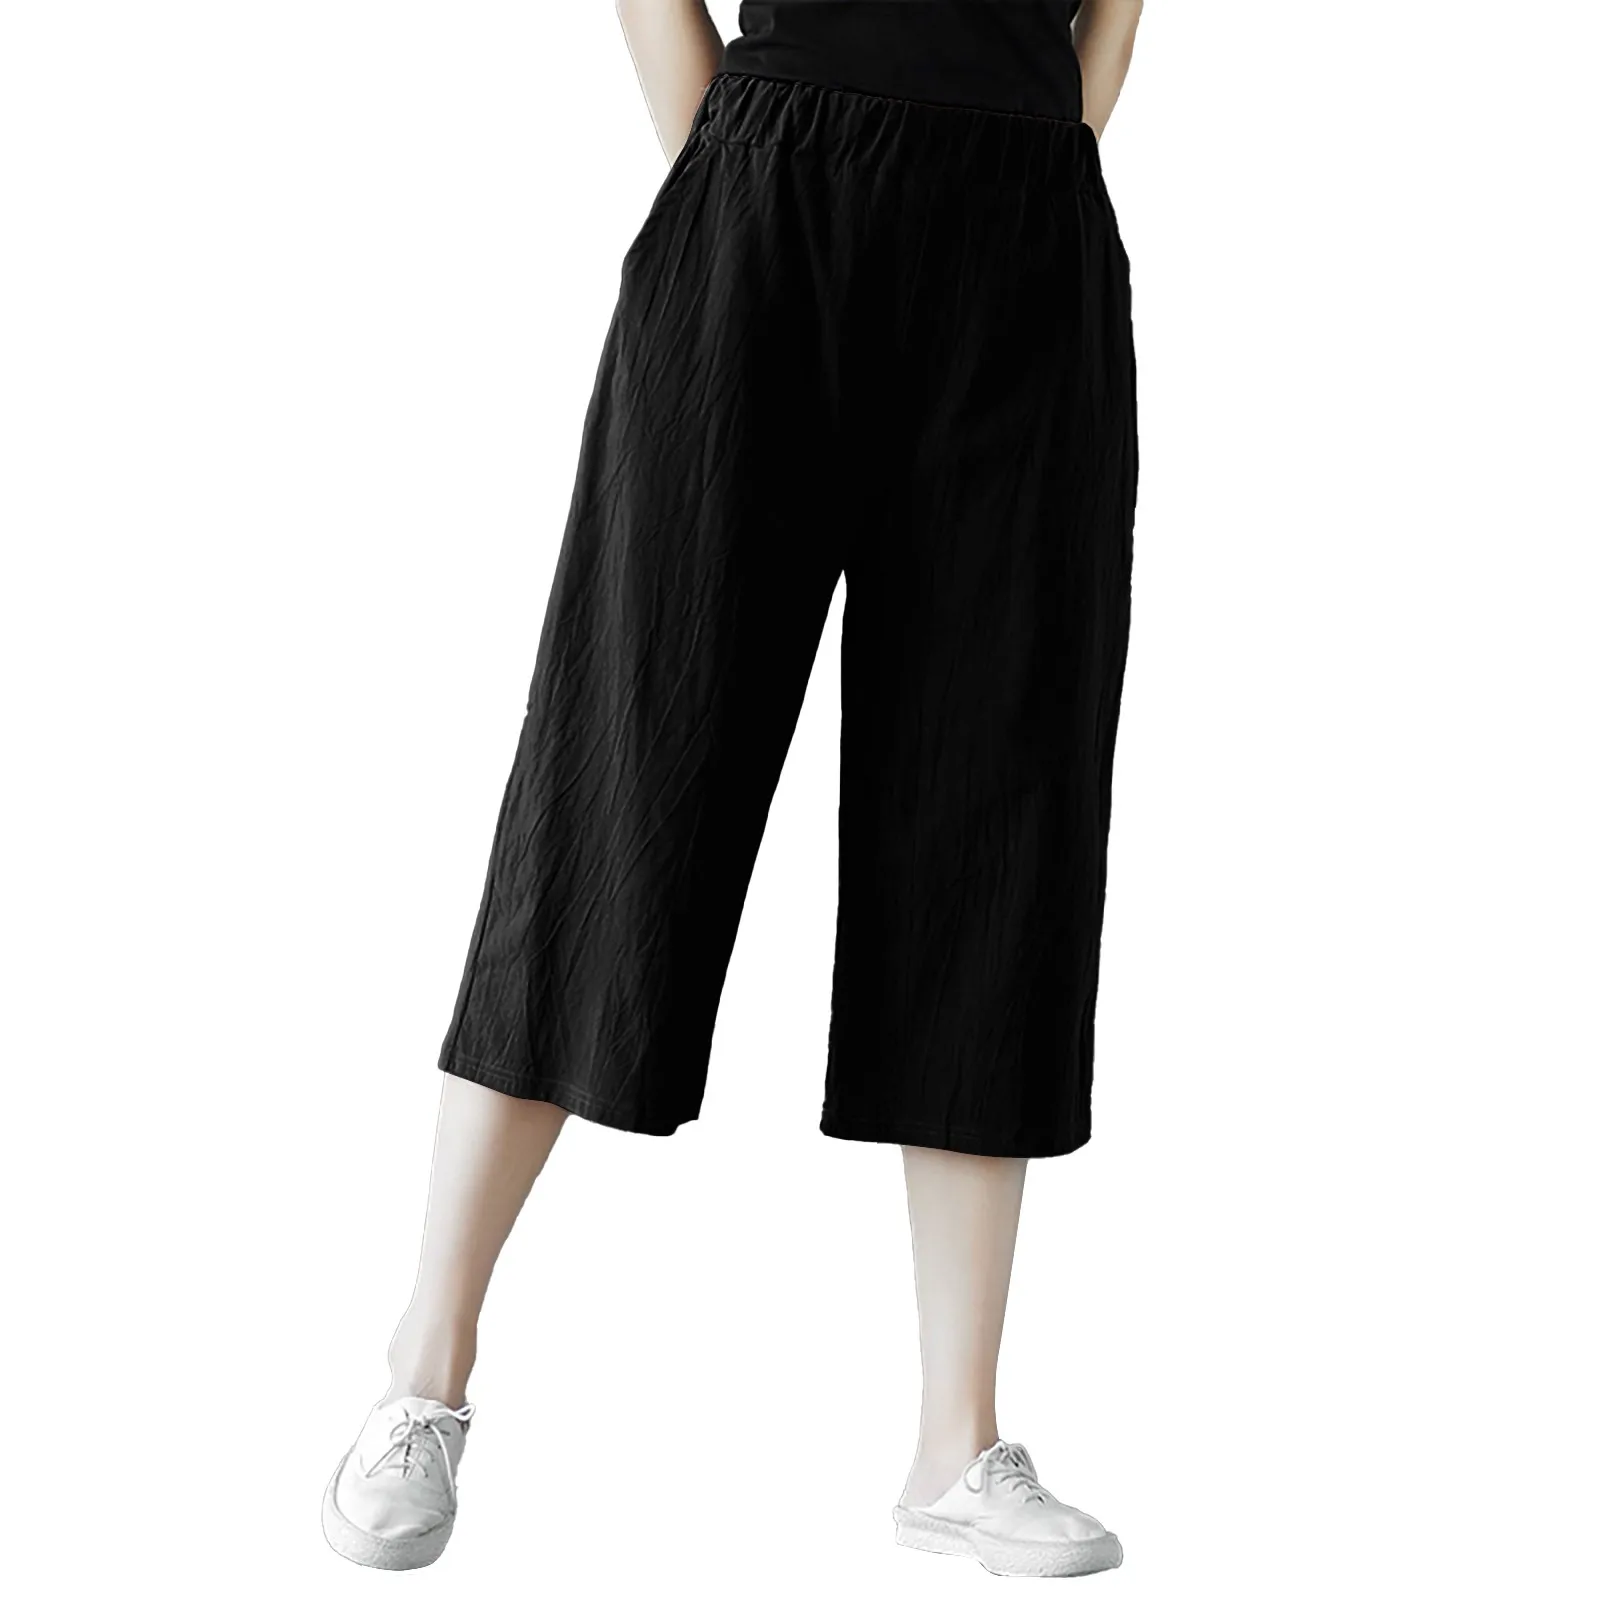 High Waist Cotton Linen Pants for Women Casual Loose Vintage Wide Leg Trousers with Pockets Solid Color Drawstring Cropped Pants